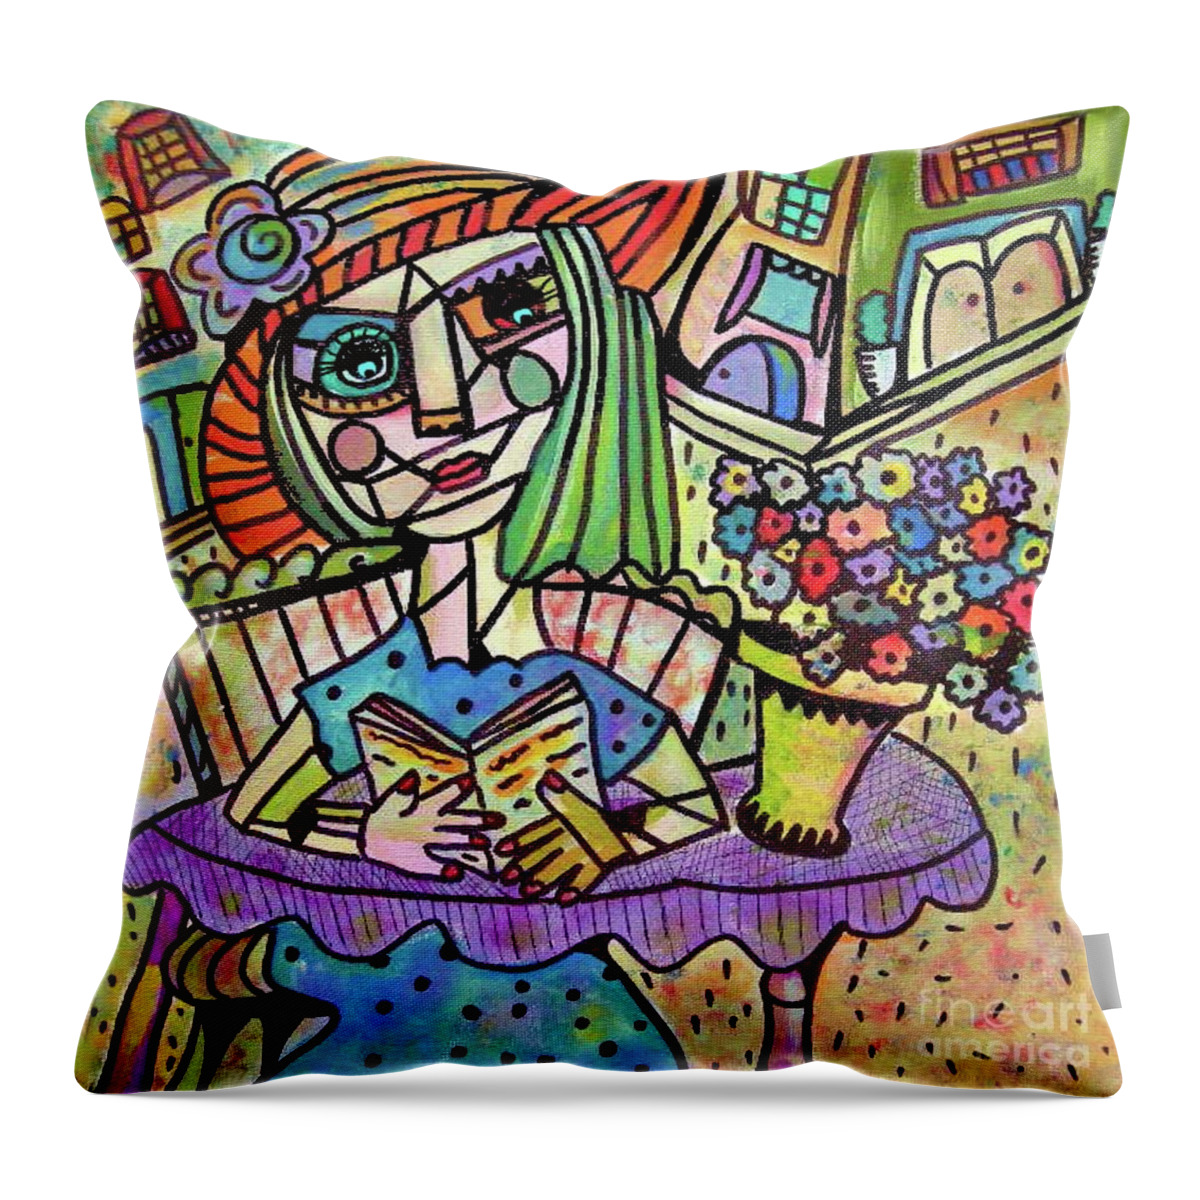 City Throw Pillow featuring the painting Old City Cafe Flowers by Sandra Silberzweig